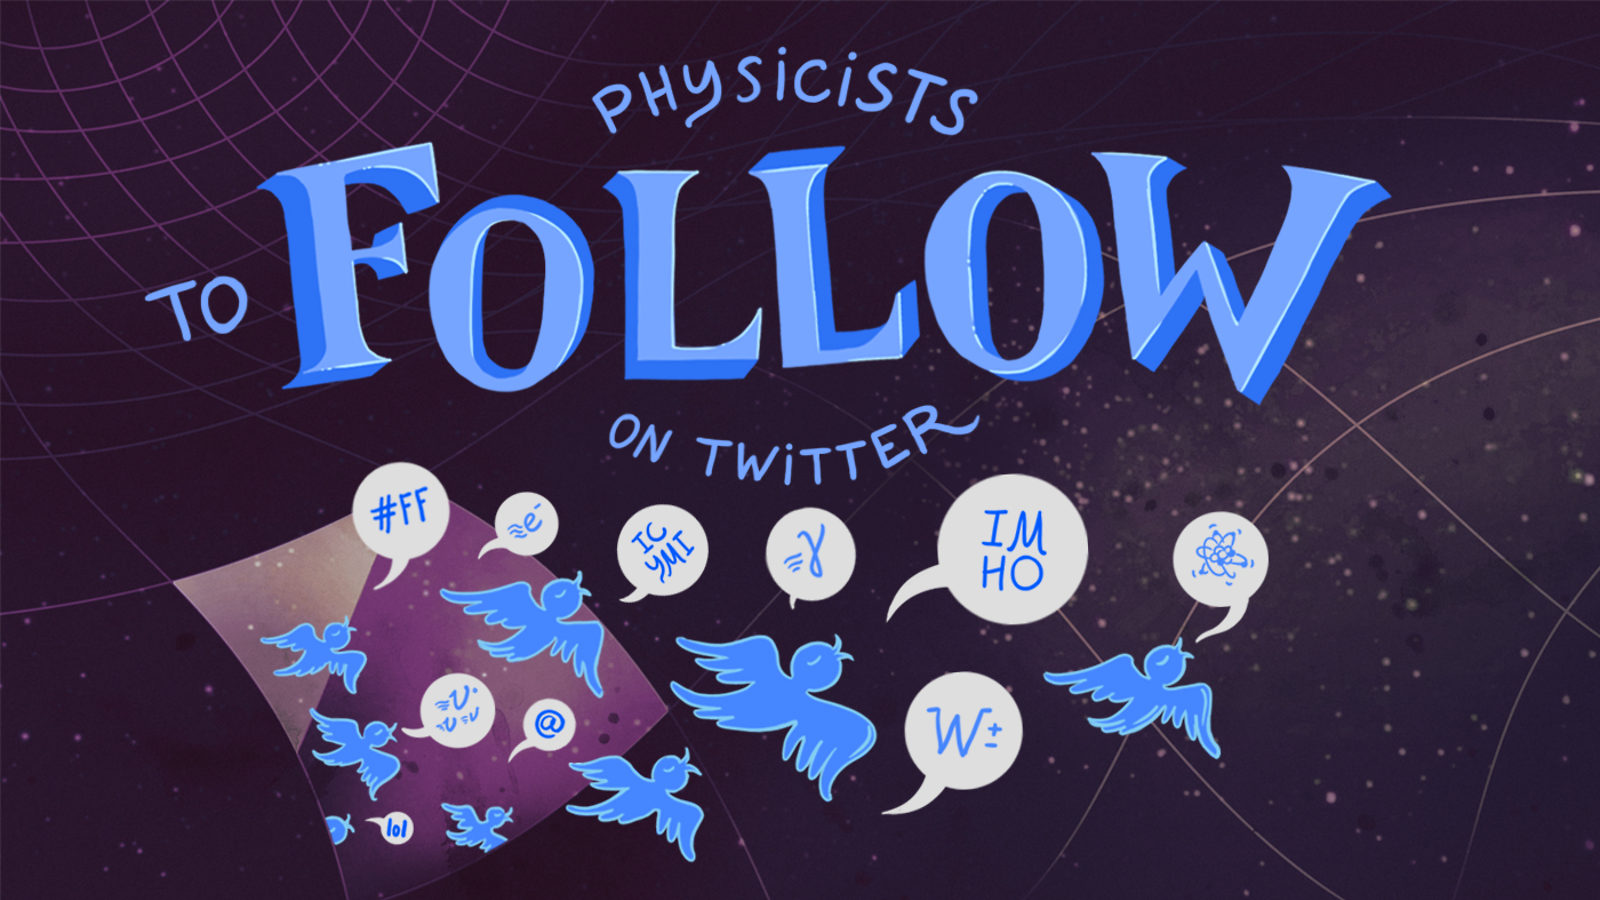 Illustration of grid in space "Physicists To Follow On Twitter"